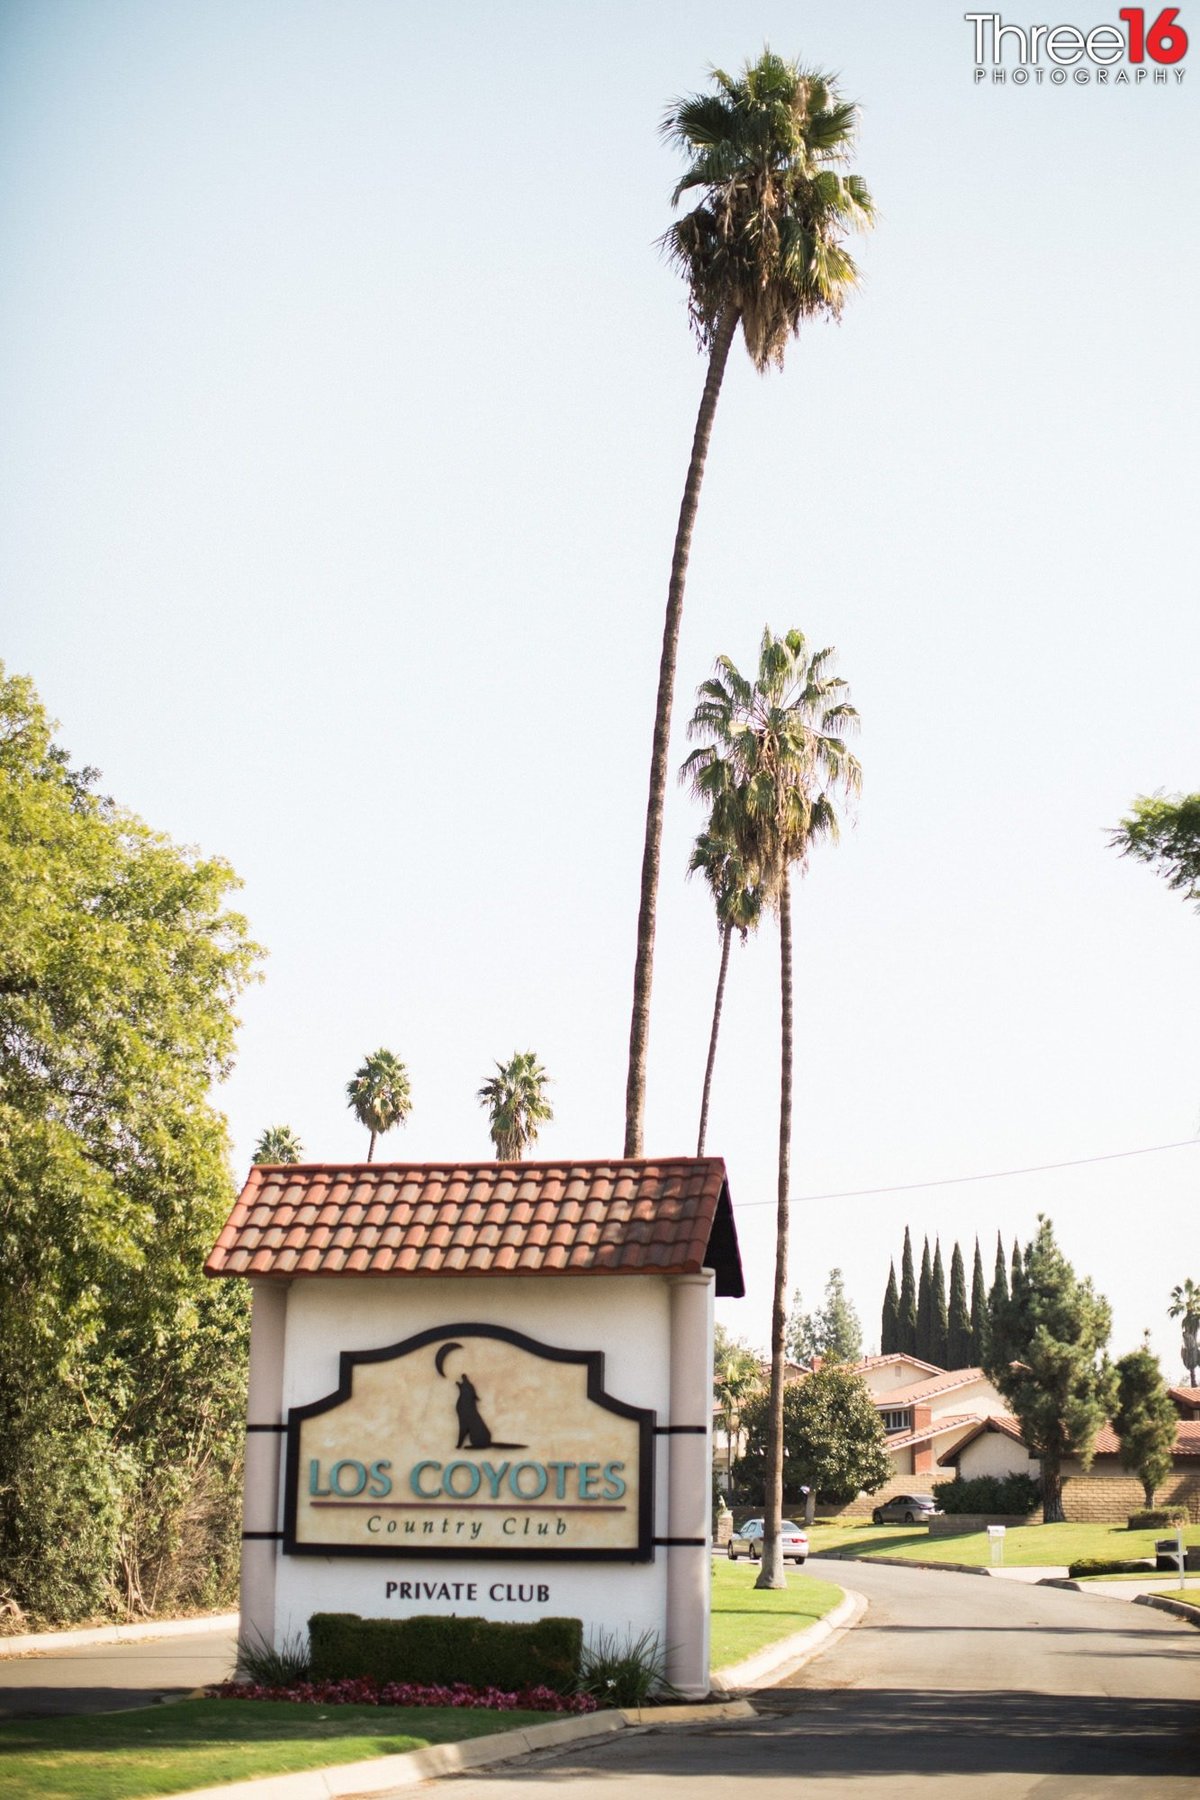 Main entrance to the Los Coyotes Country Club